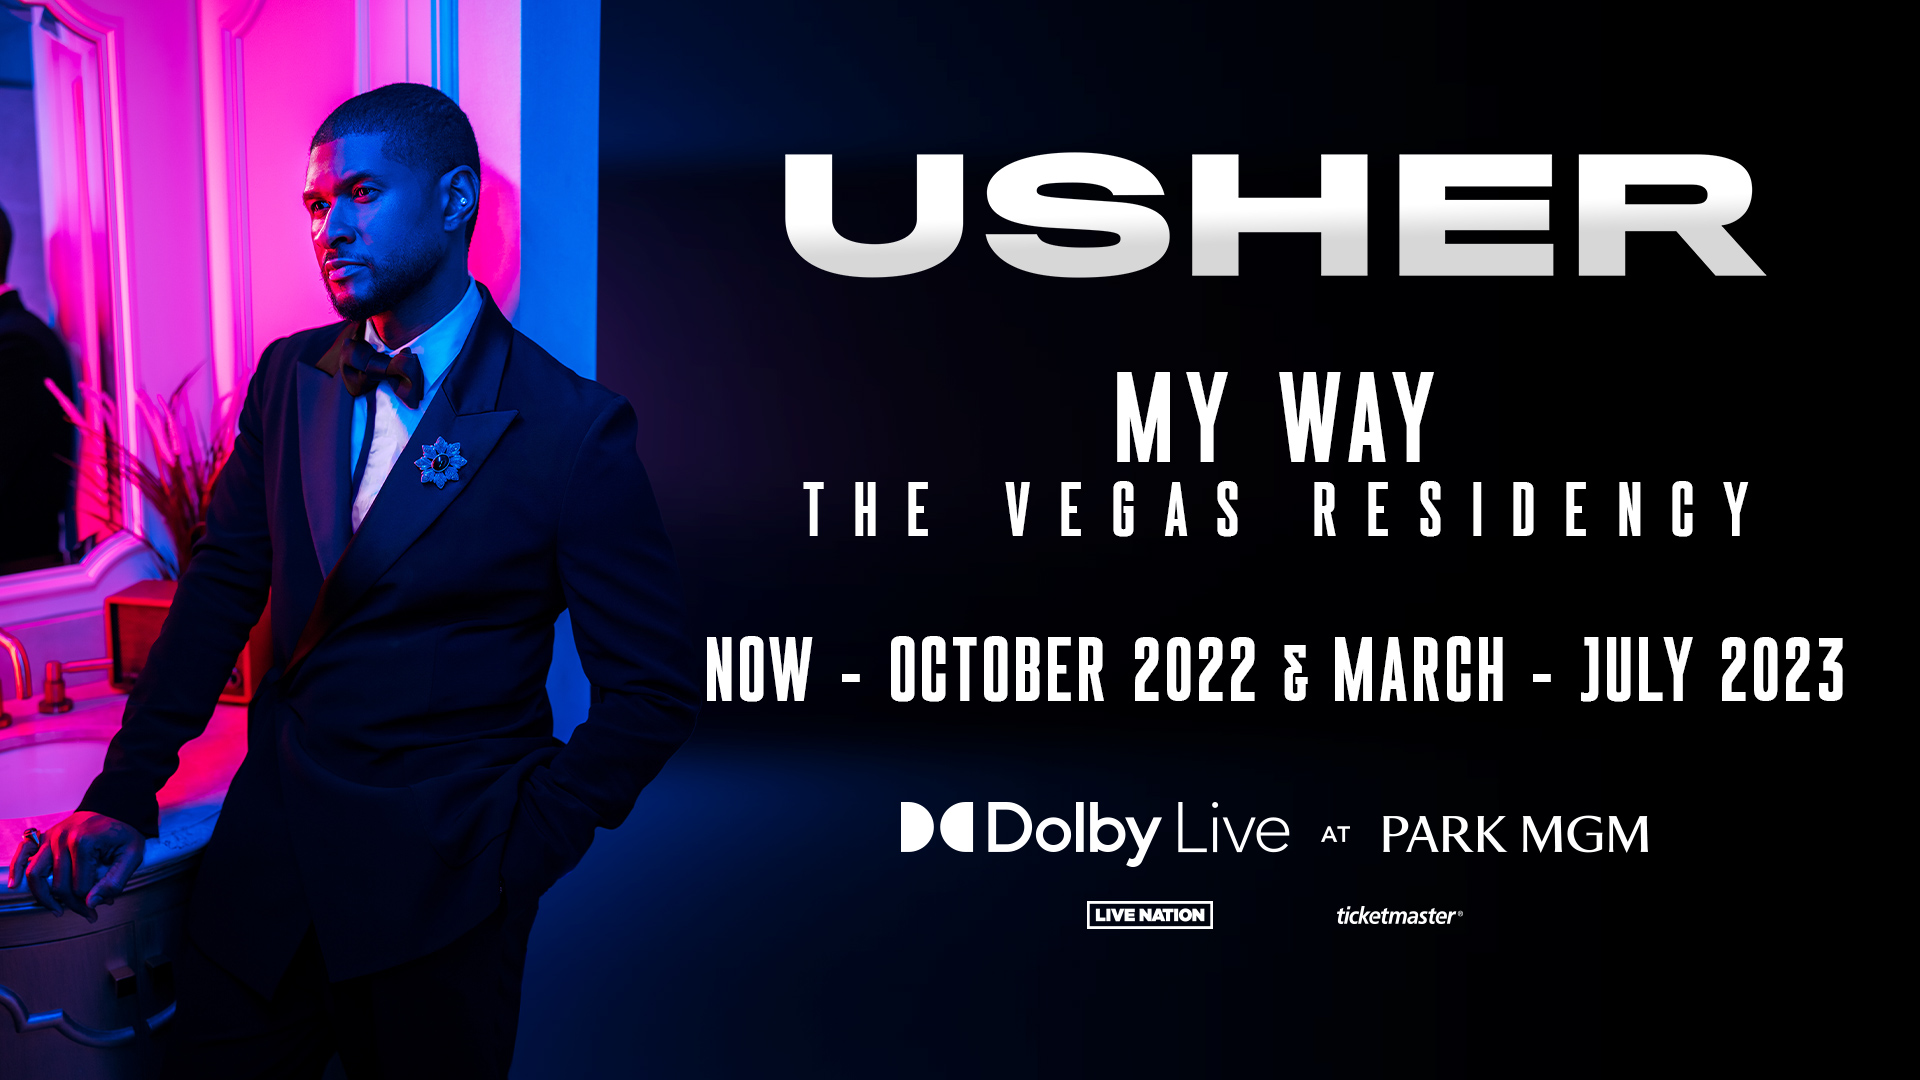 Win a Trip to see Usher in Las Vegas!